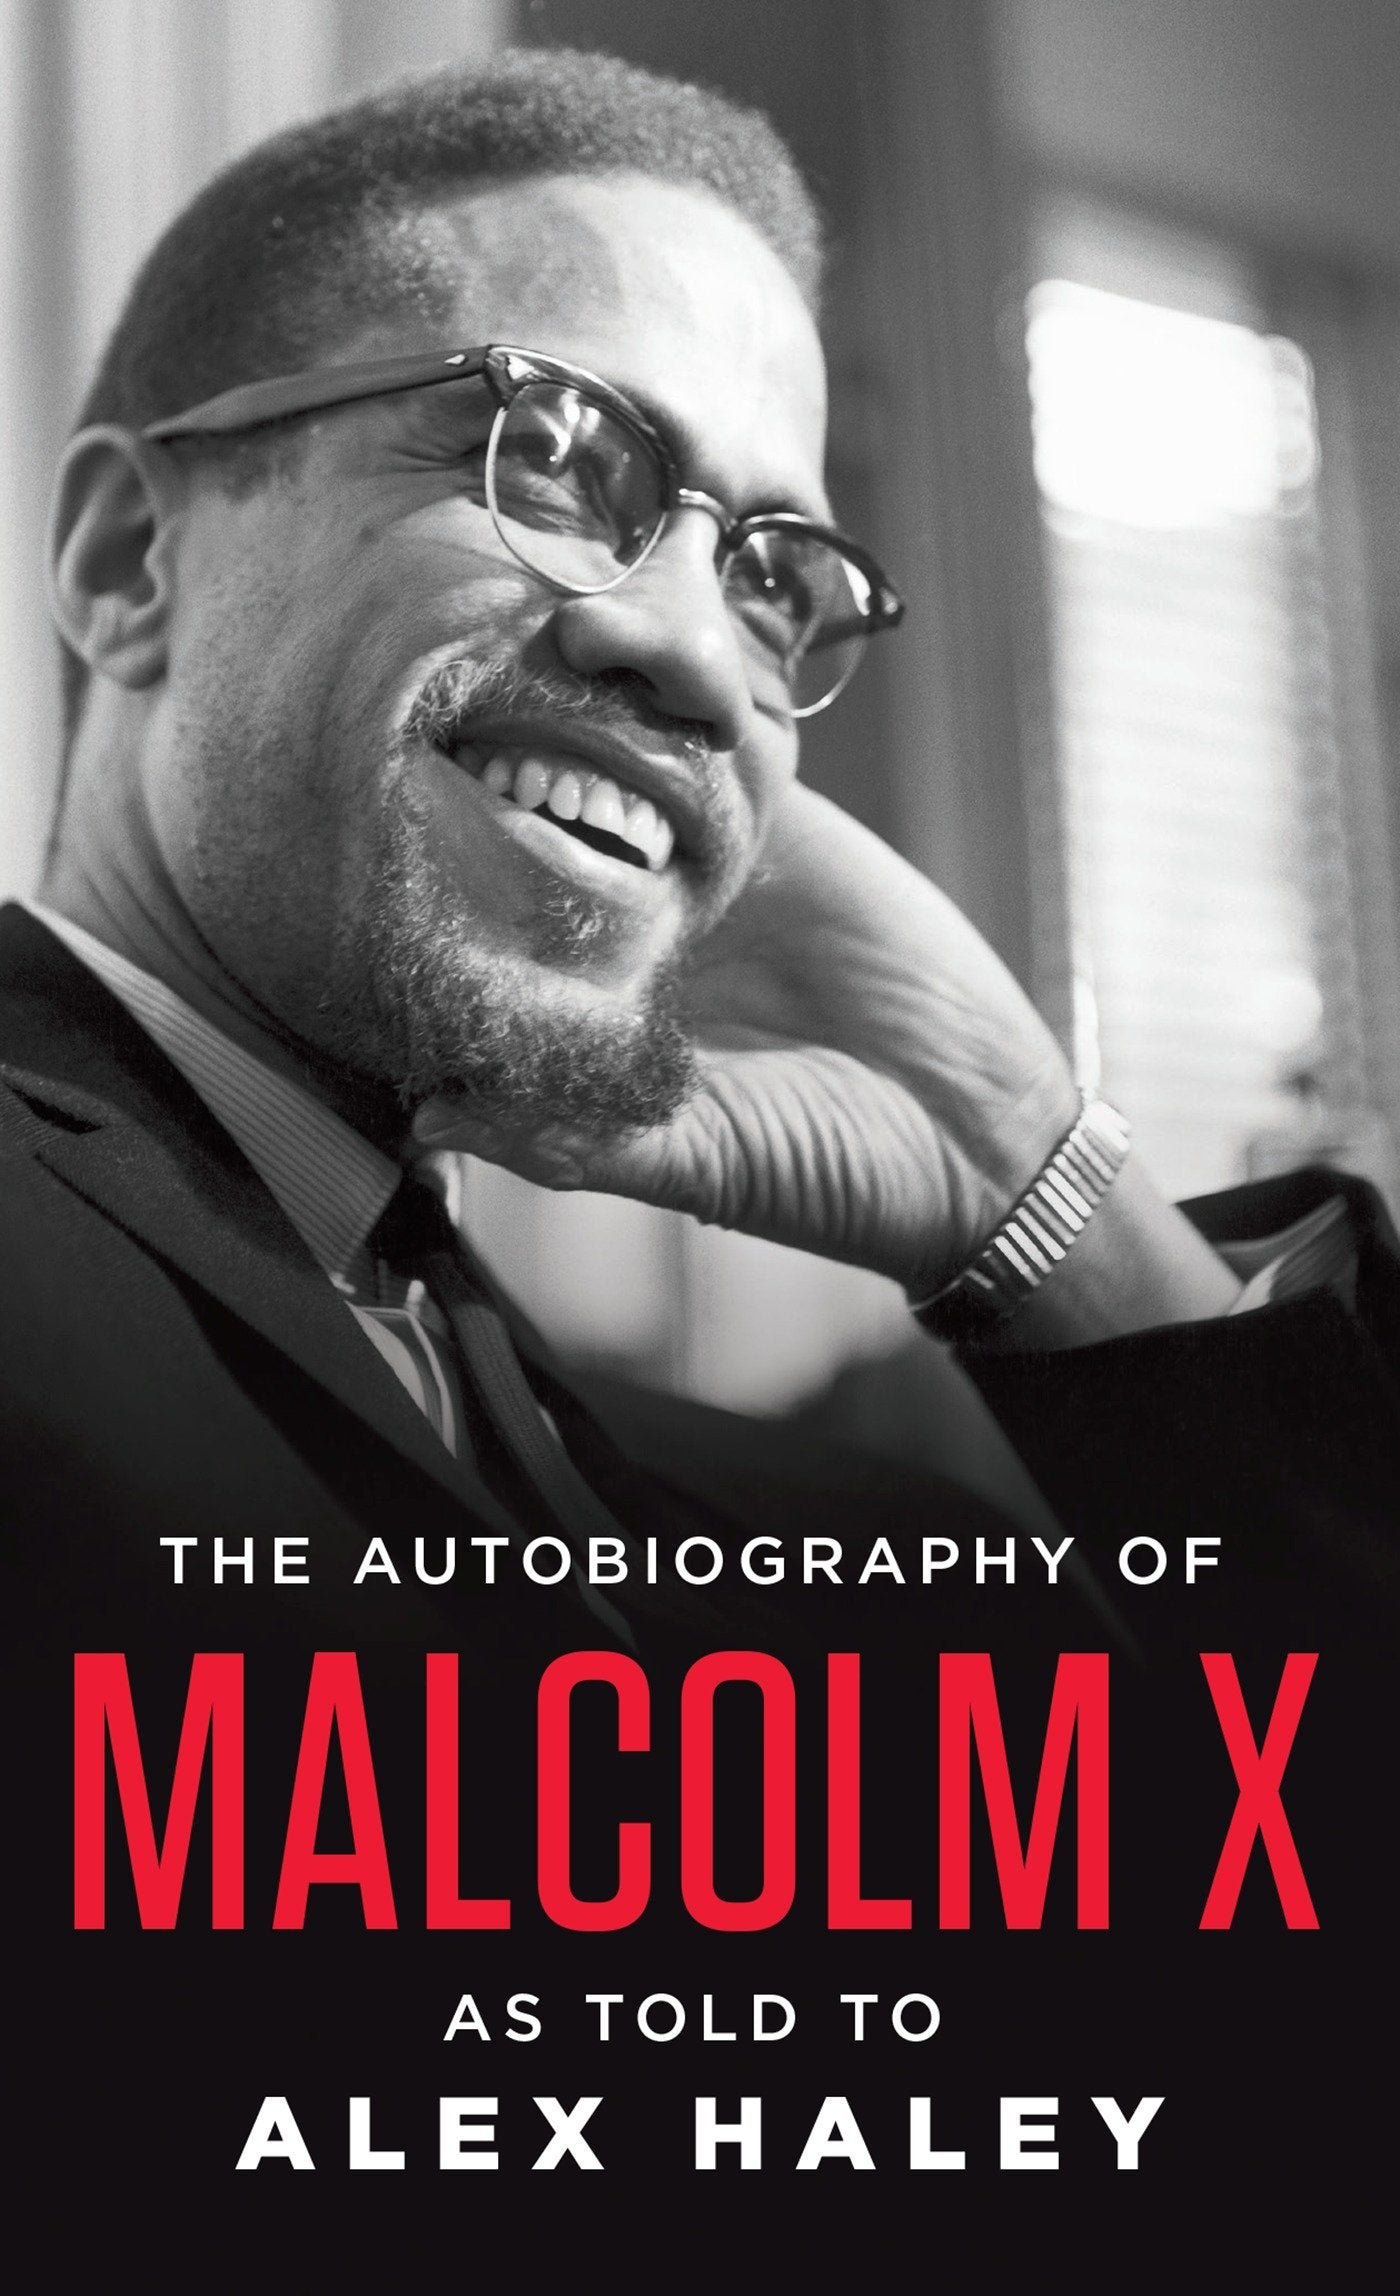 The Autobiography of Malcom X (as told to Alex Haley)